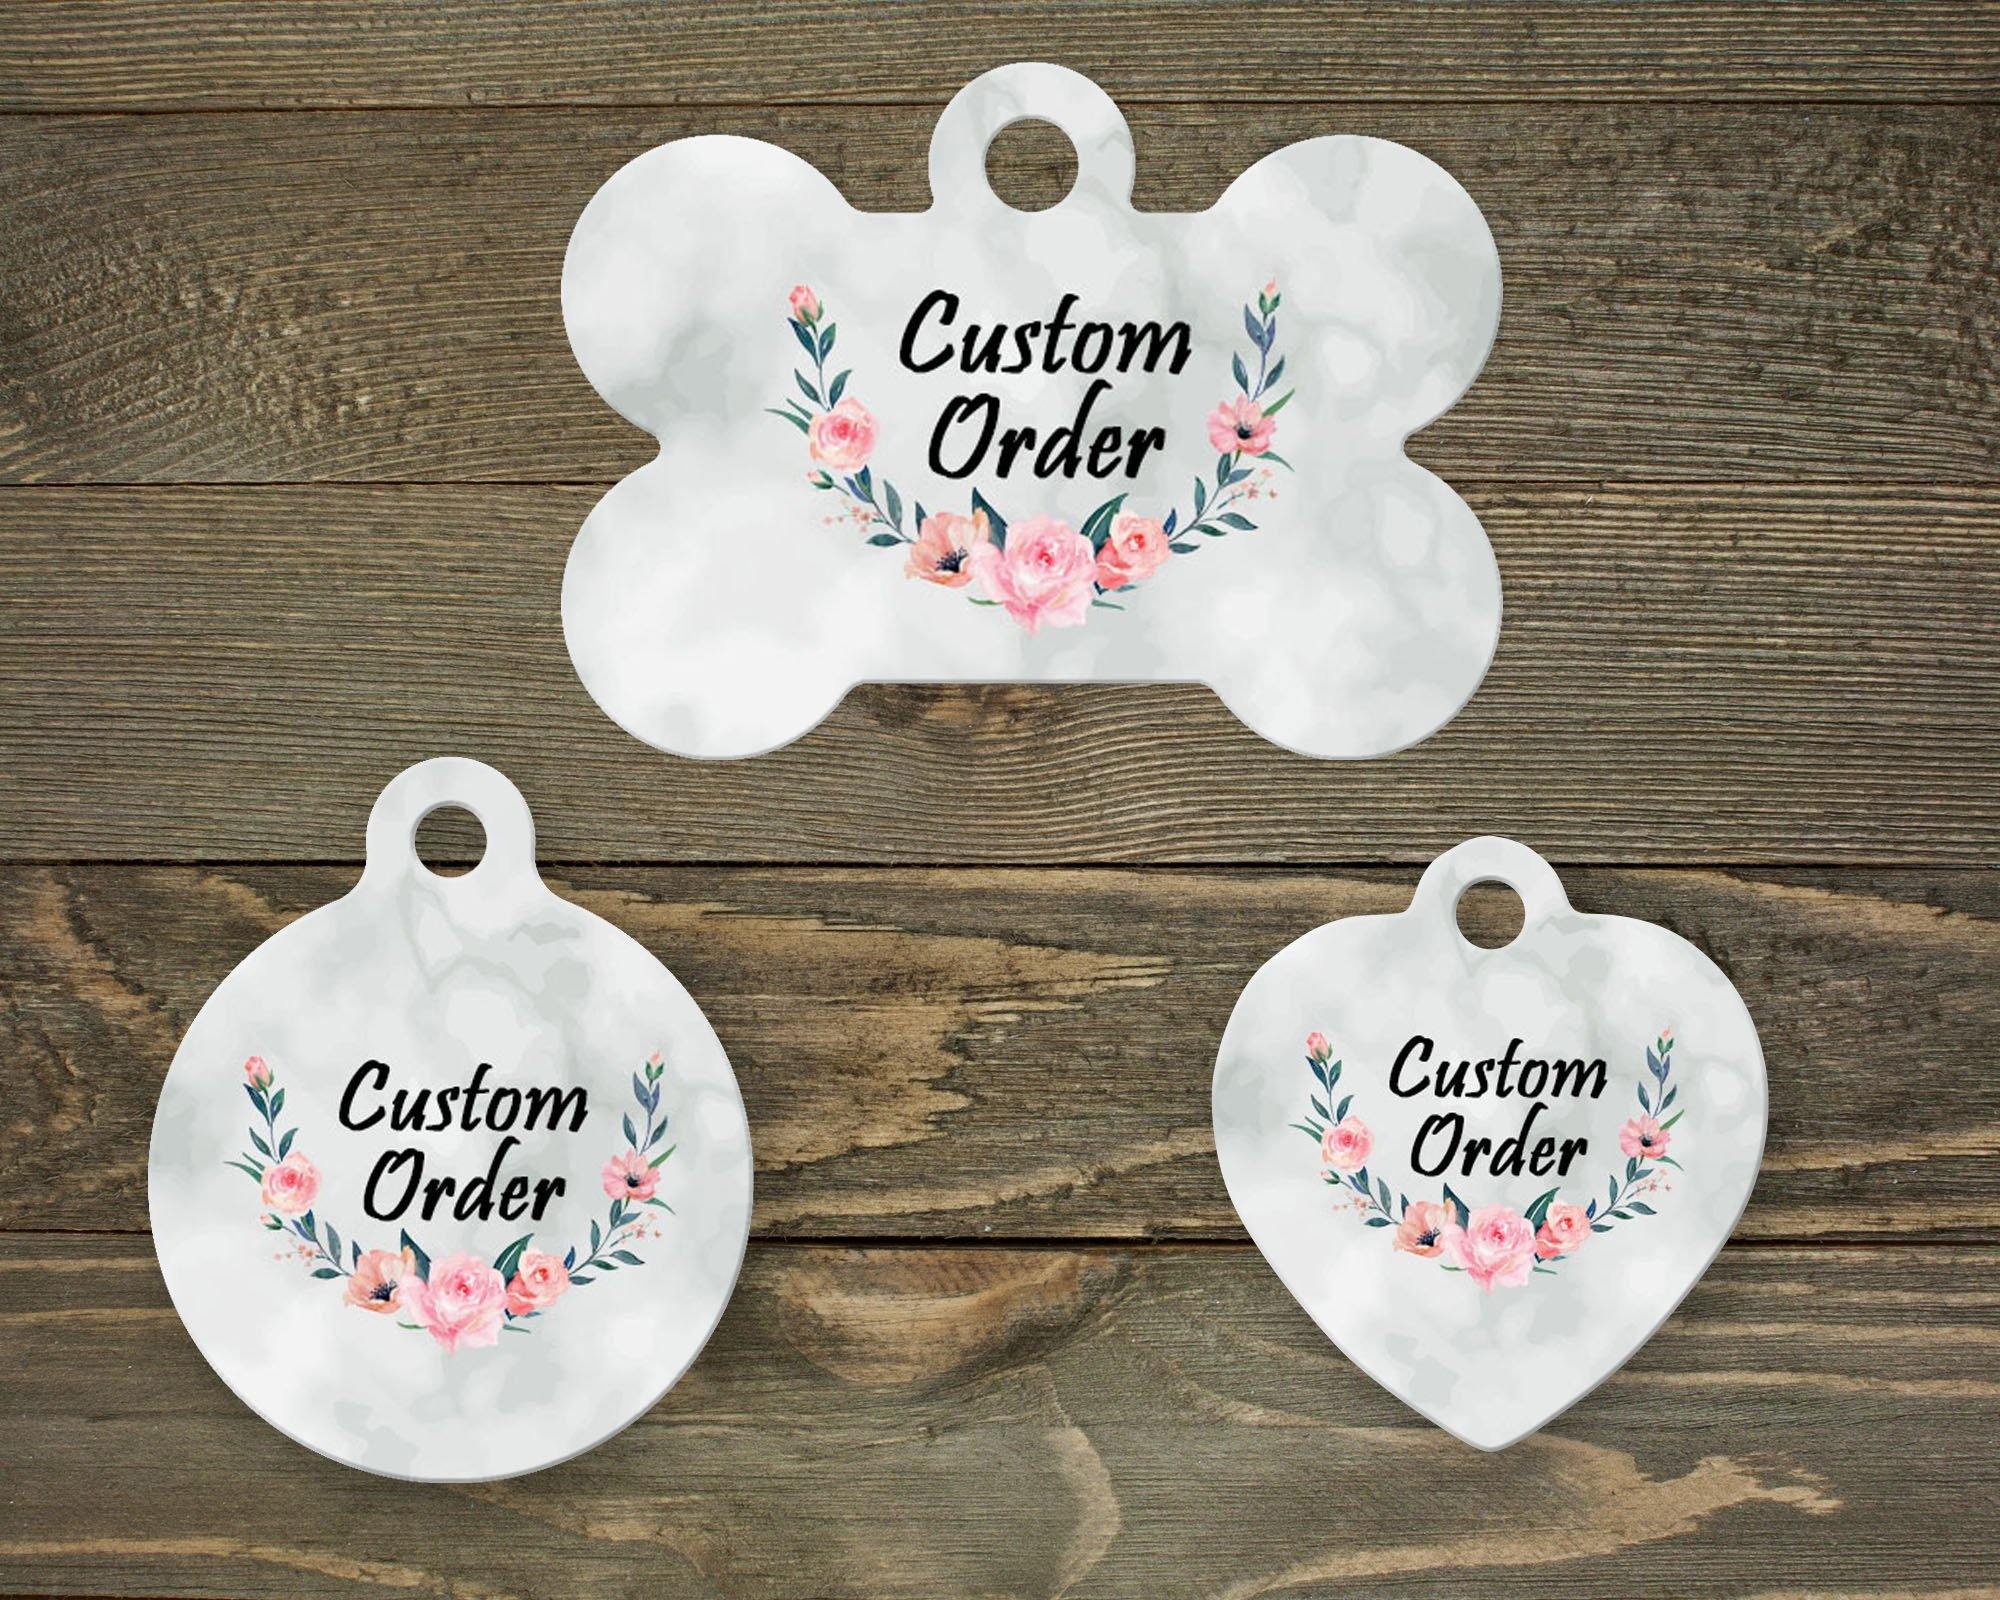 Personalized Pet Tags | Custom Pet Tags | Pet Accessories | Custom Order - This & That Solutions - Personalized Pet Tags | Custom Pet Tags | Pet Accessories | Custom Order - Personalized Gifts & Custom Home Decor